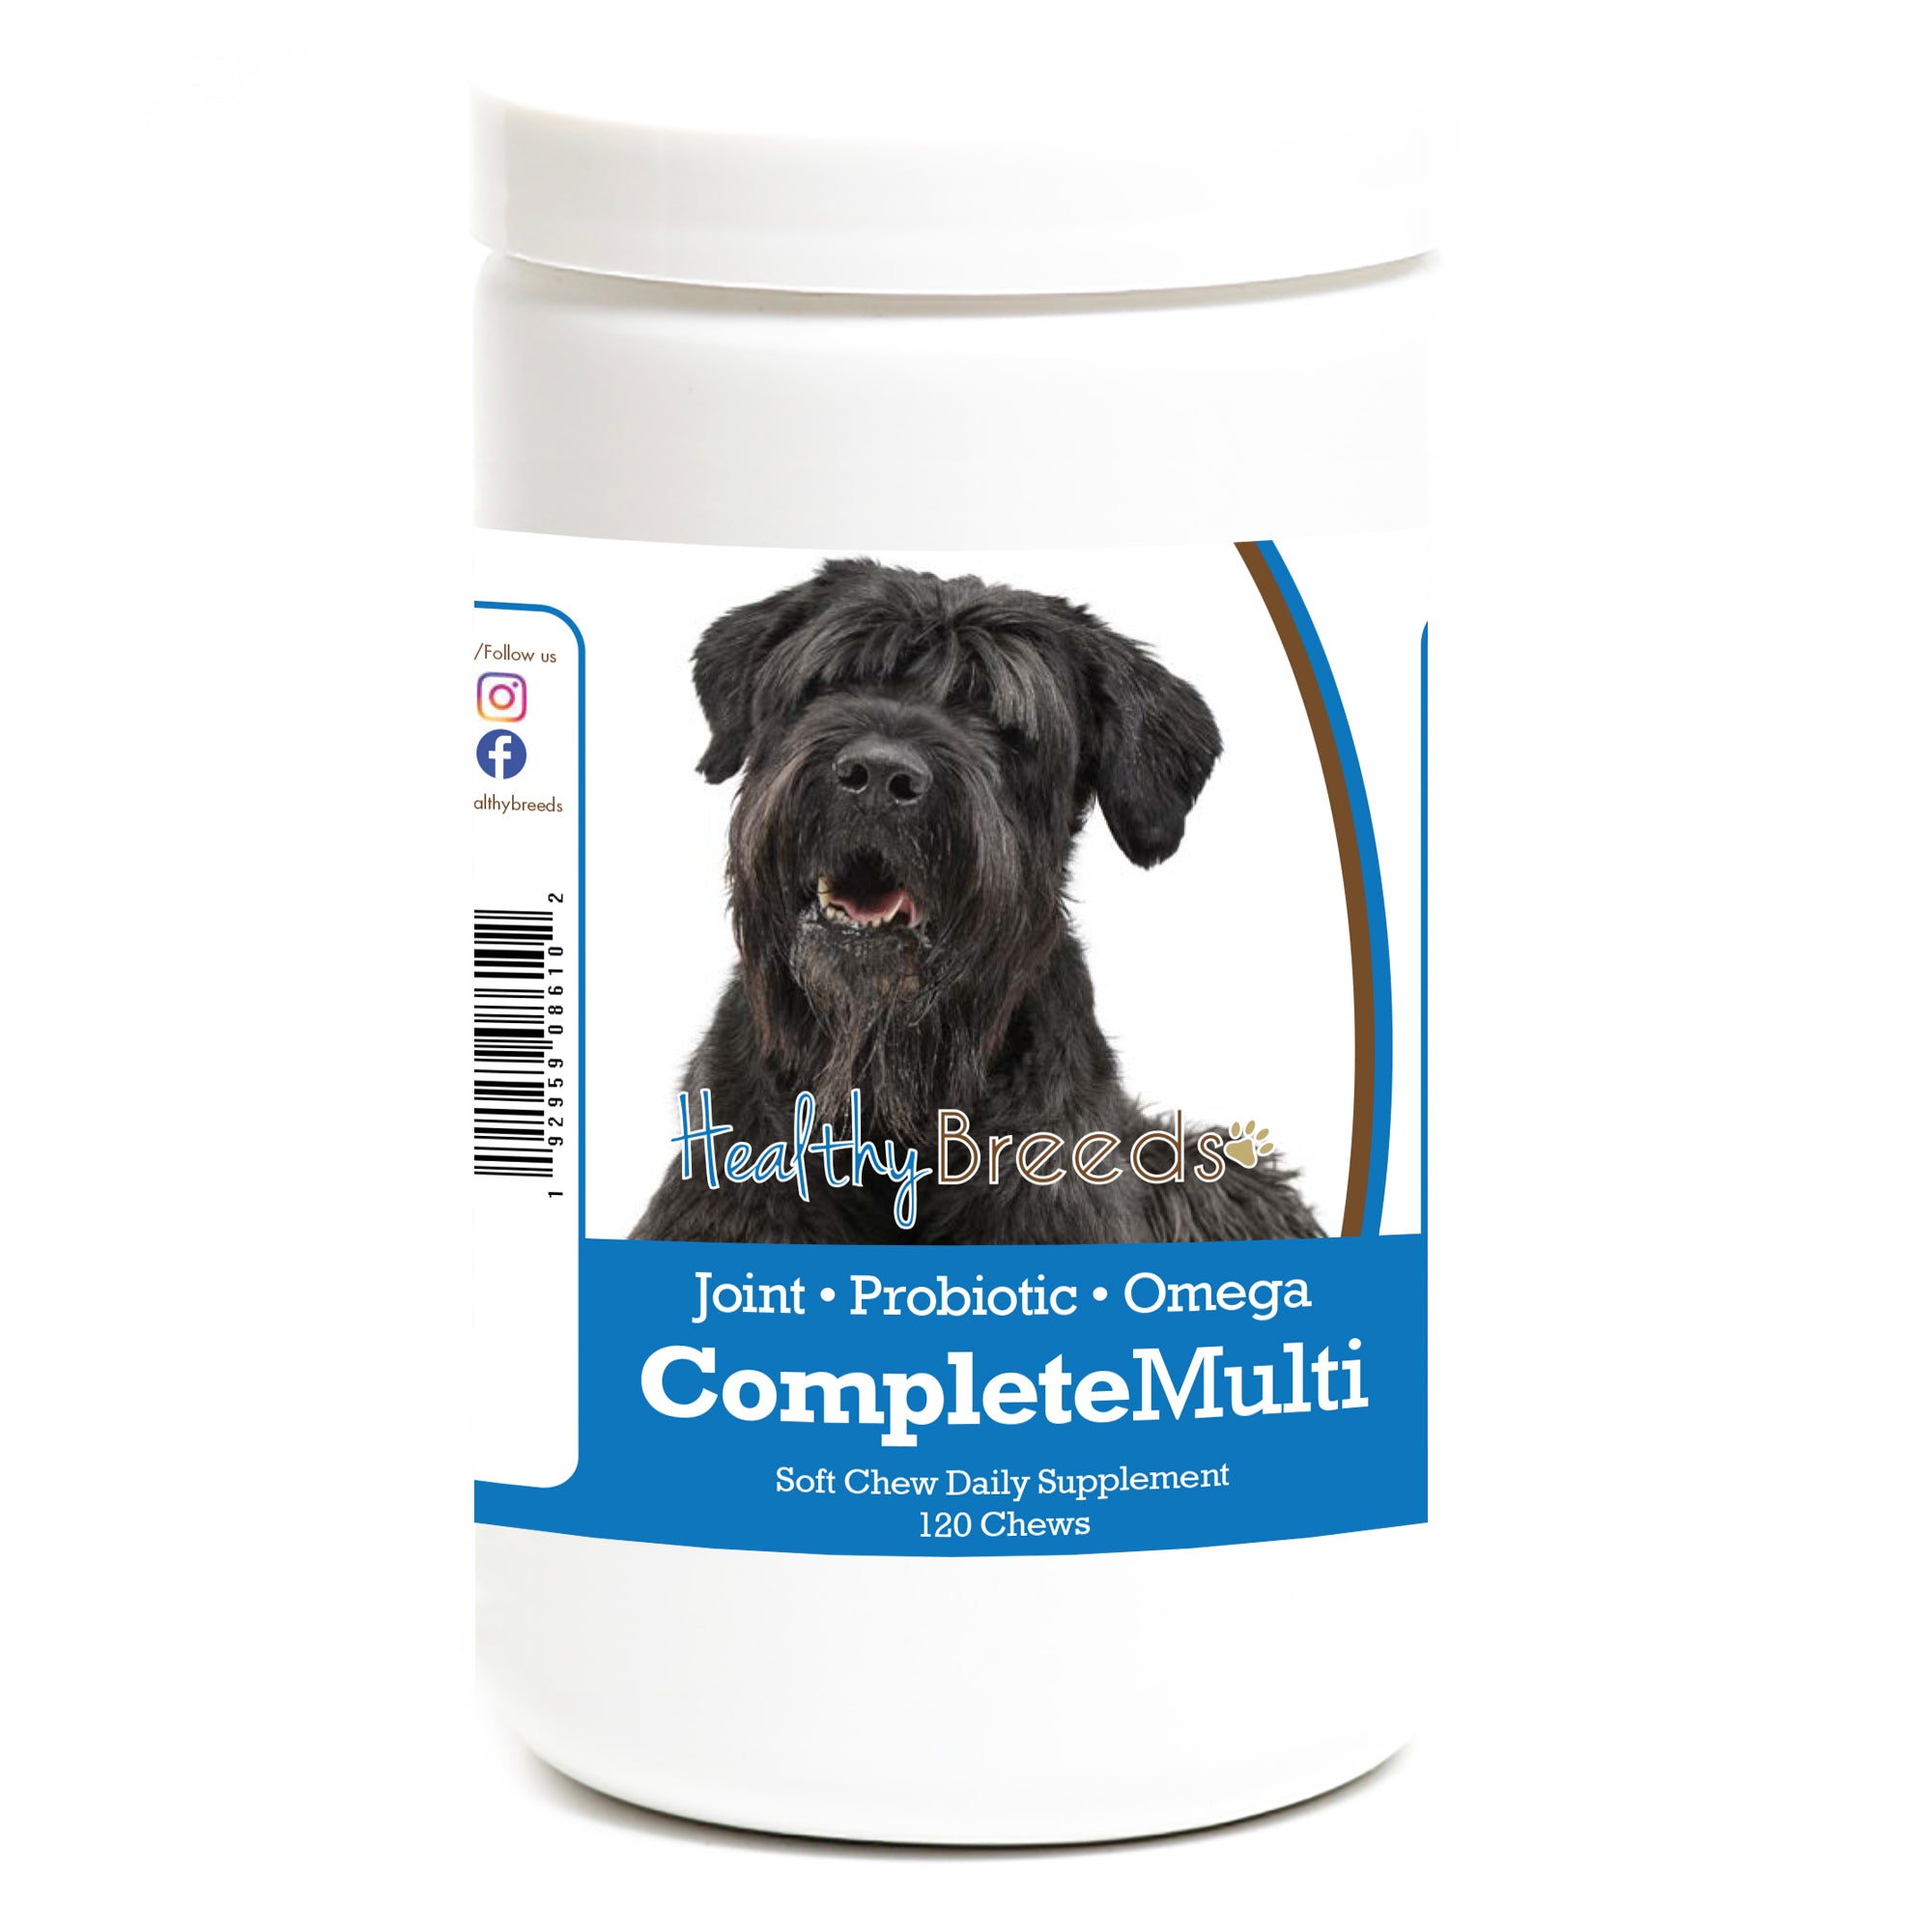 Black Russian Terrier All In One Multivitamin Soft Chew 120 Count